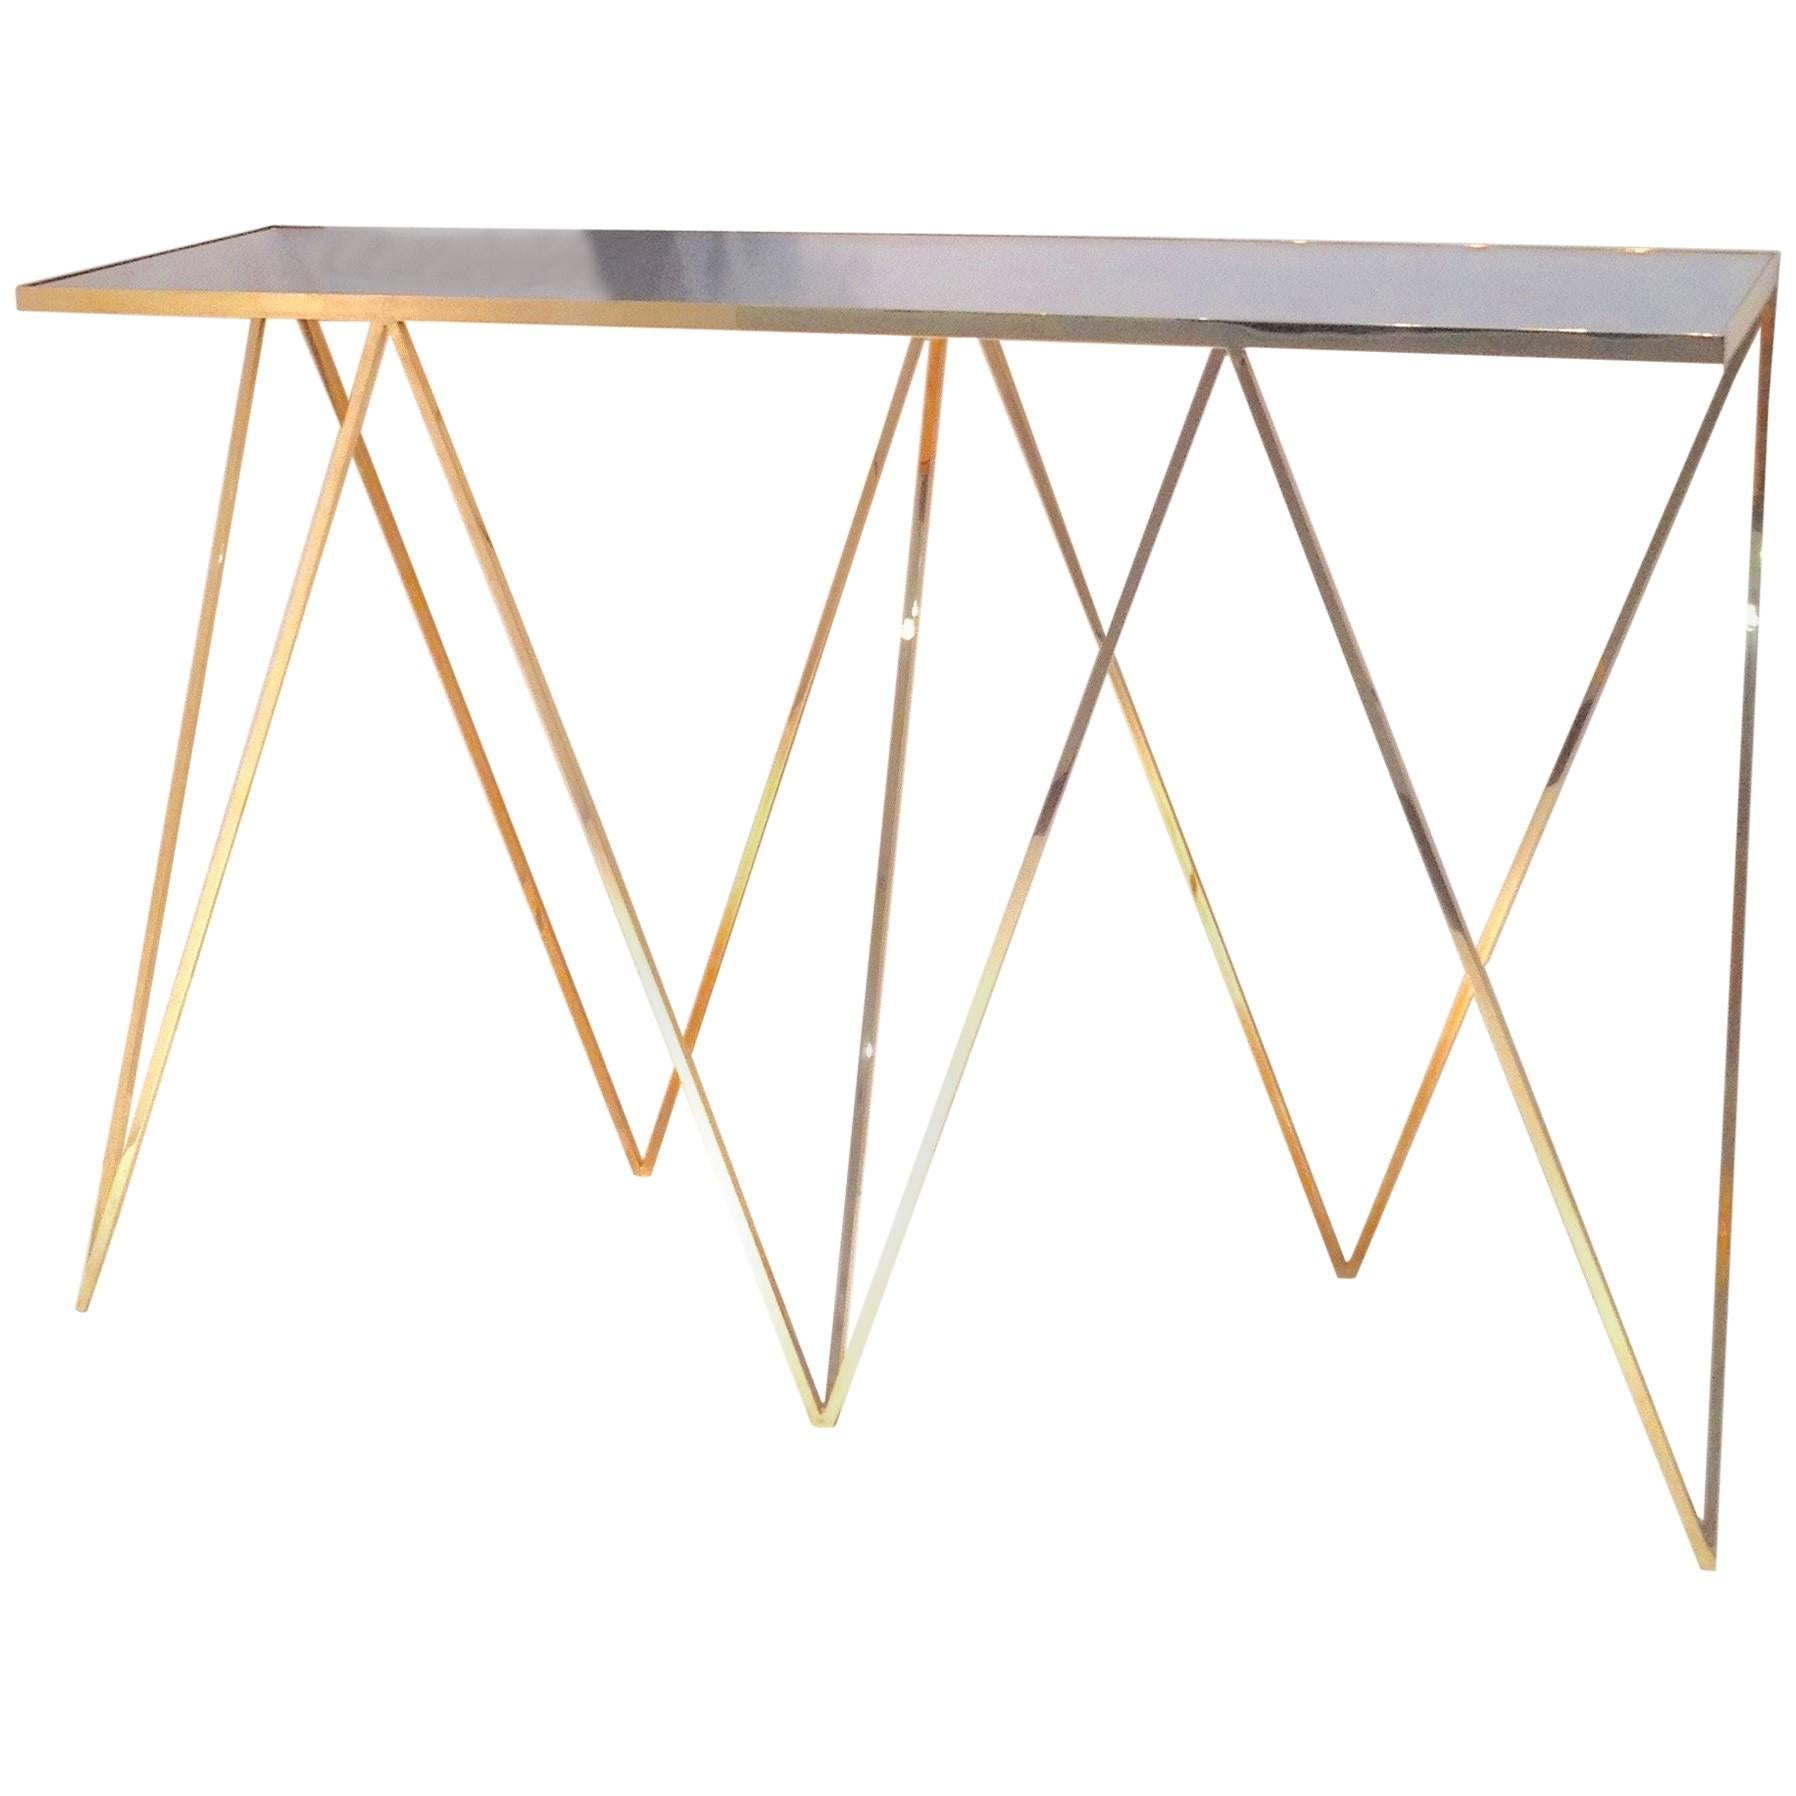 Luxurious Brass Giraffe Console Table with Mirror Polished Steel Top